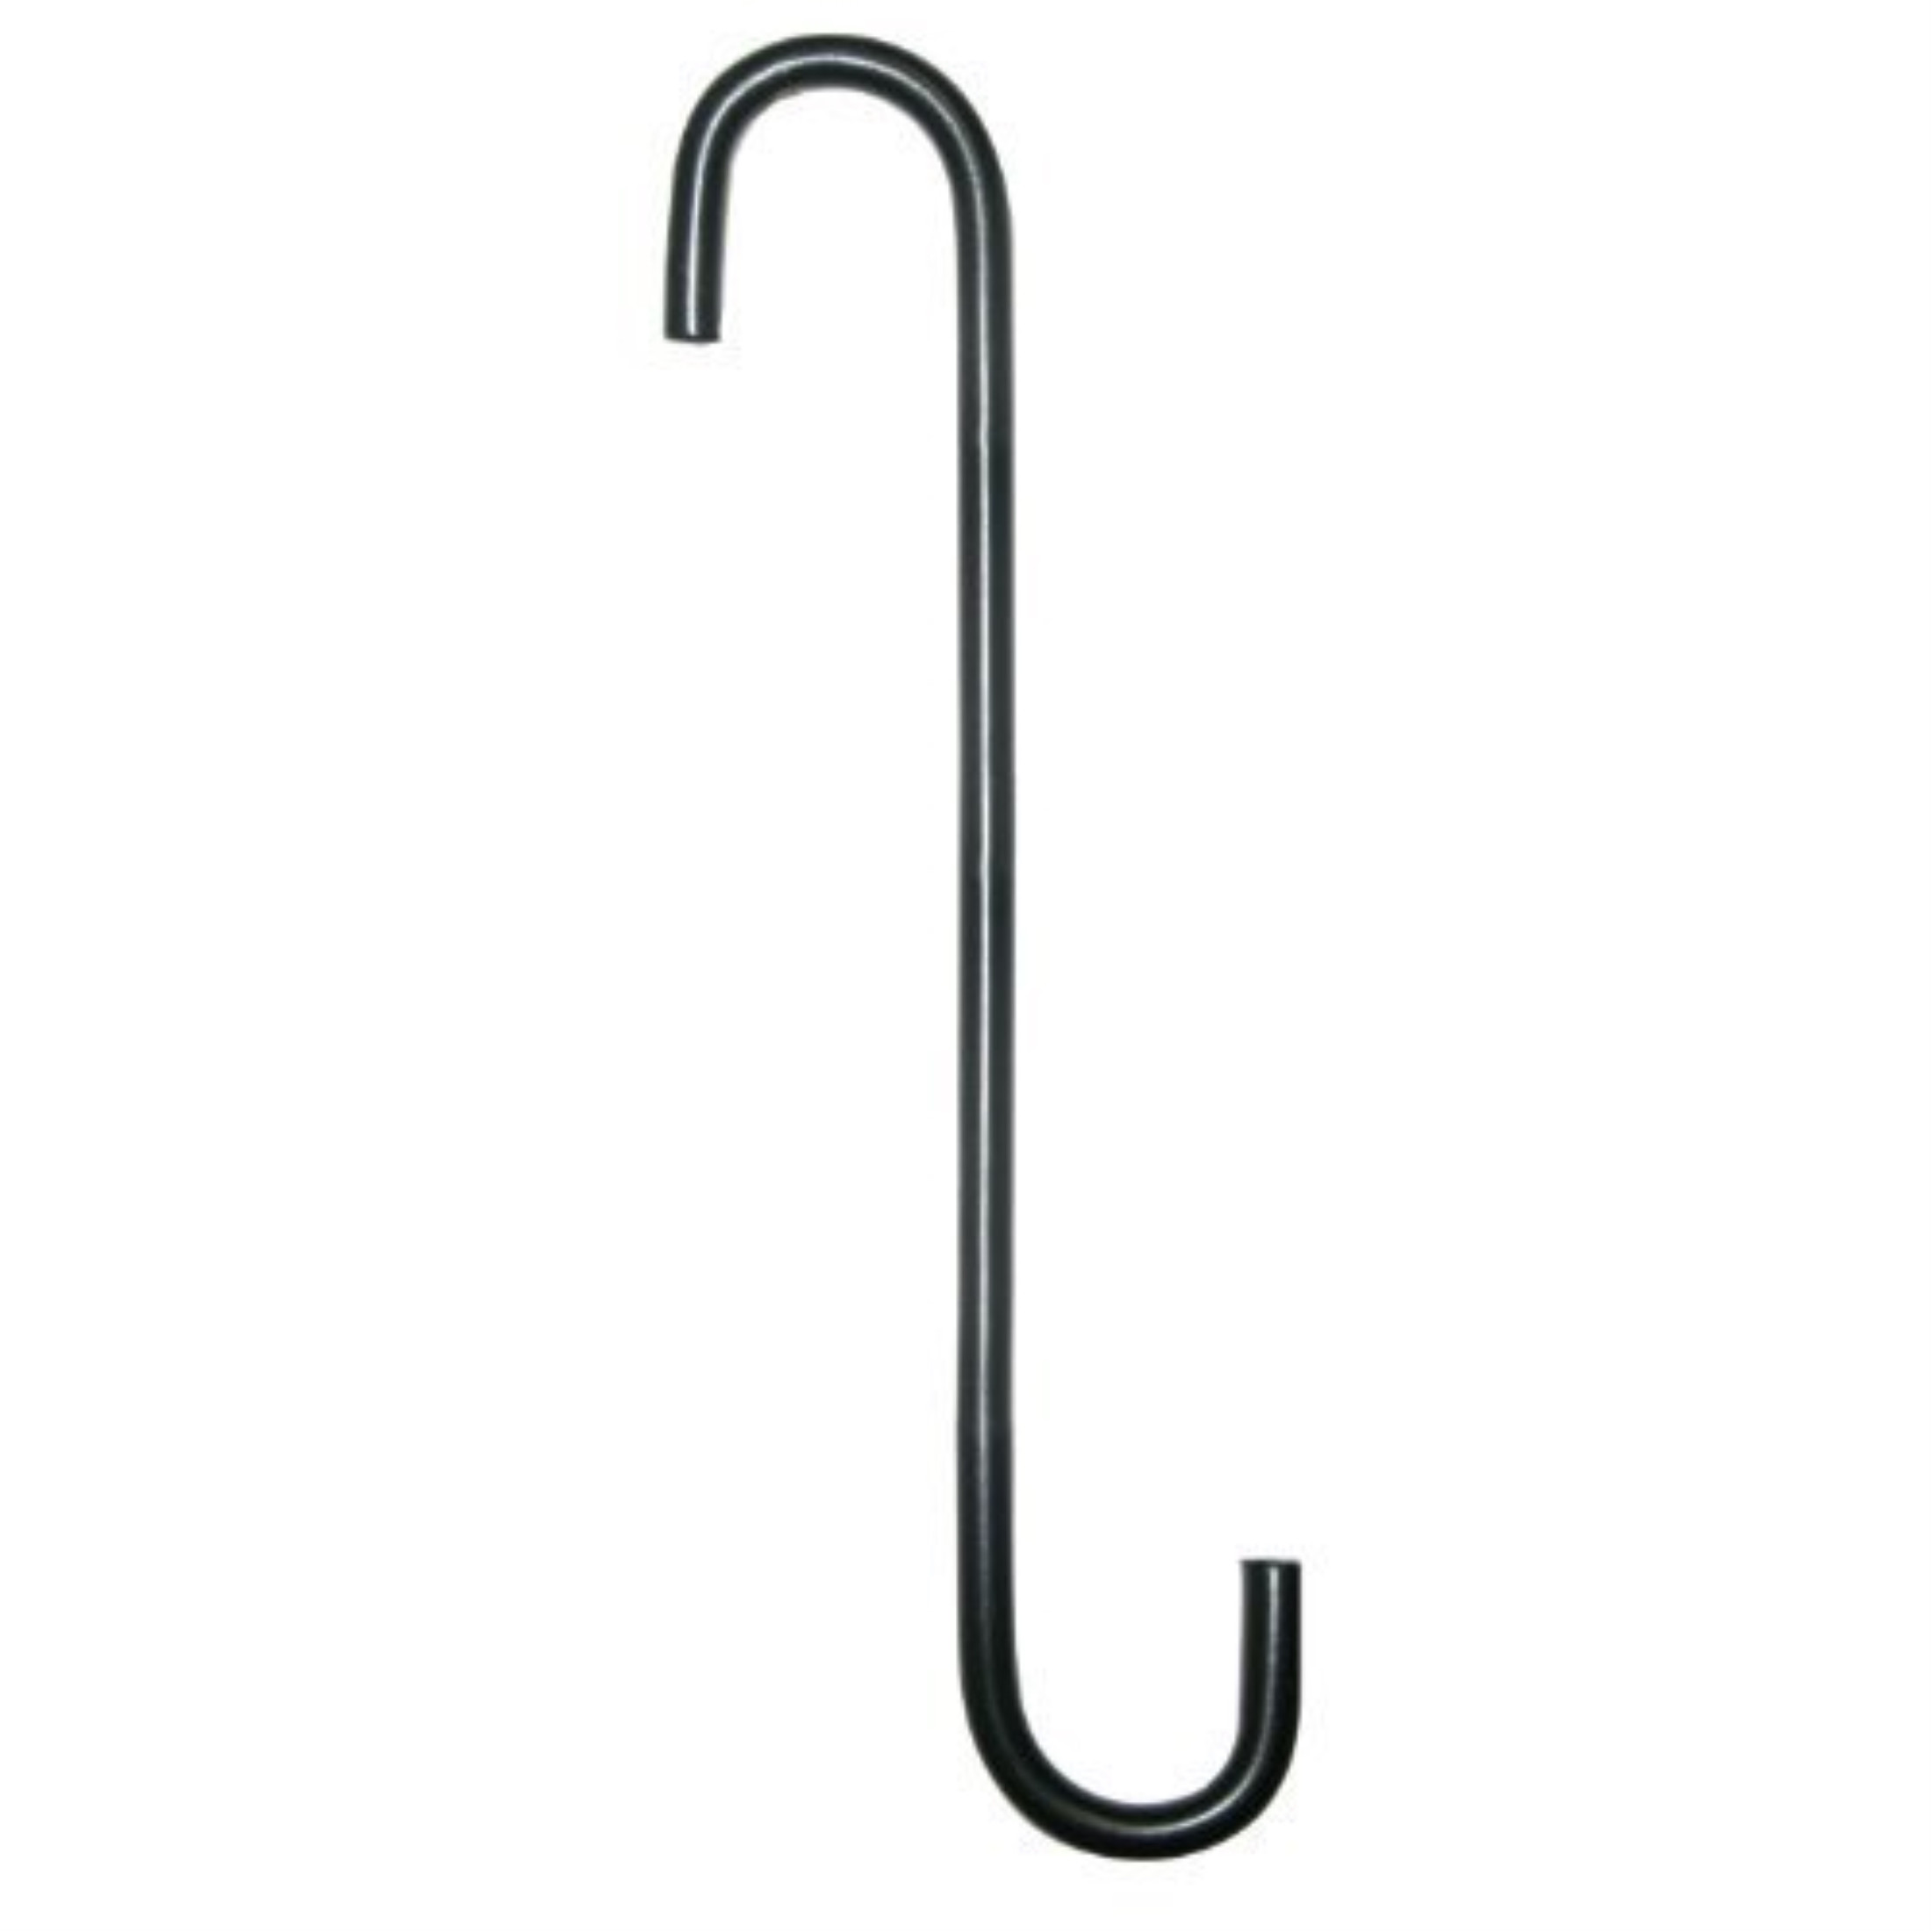 Hookery (#RS8) Metal S Extension Hook, Black 8?? with 1?? Opening (Pack of 1)